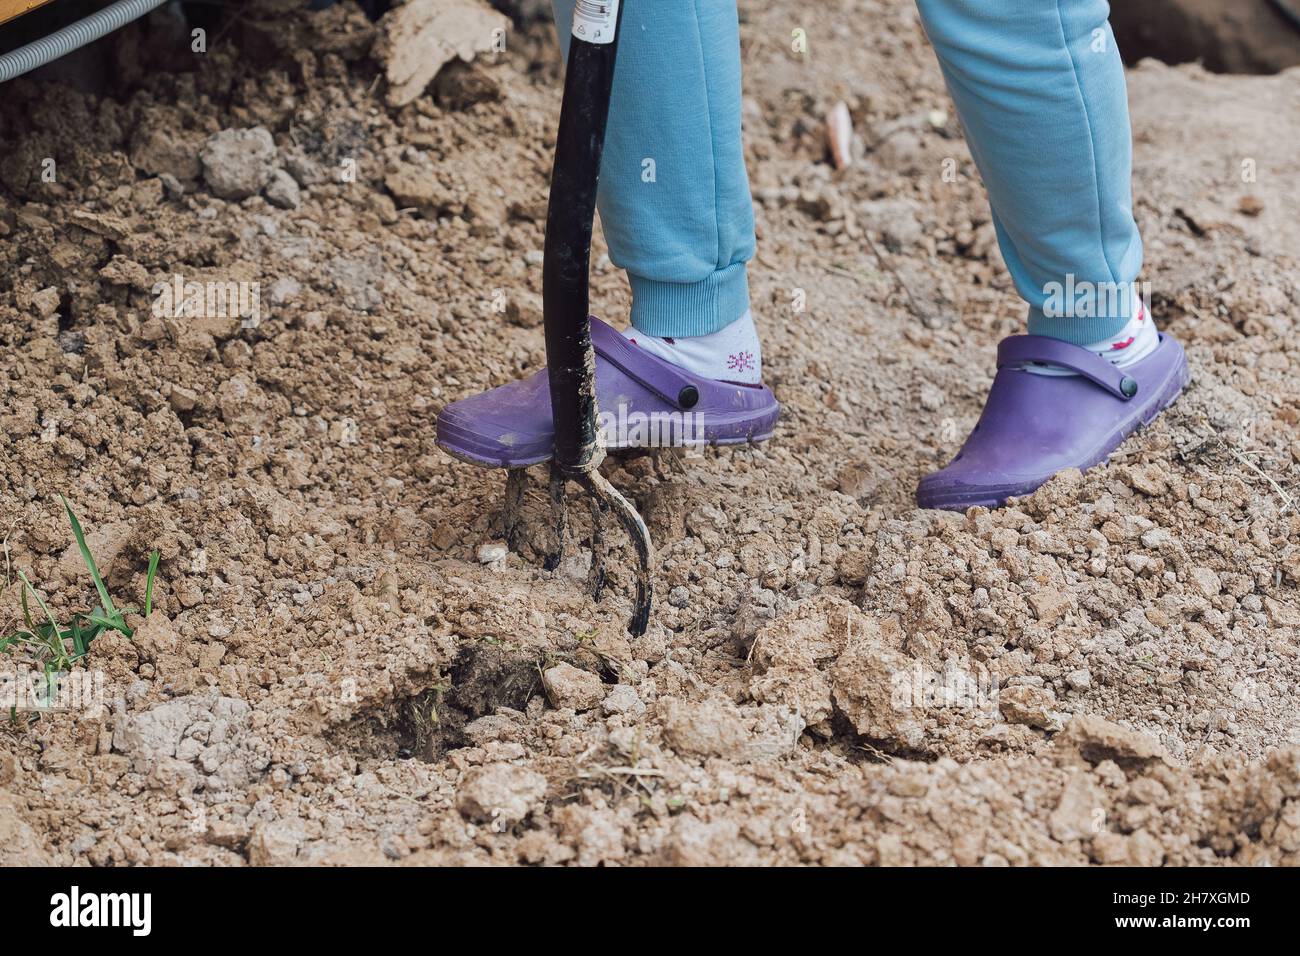 The girl digs the soil with a pitchfork in the garden to prepare a hole for planting a plant Stock Photo